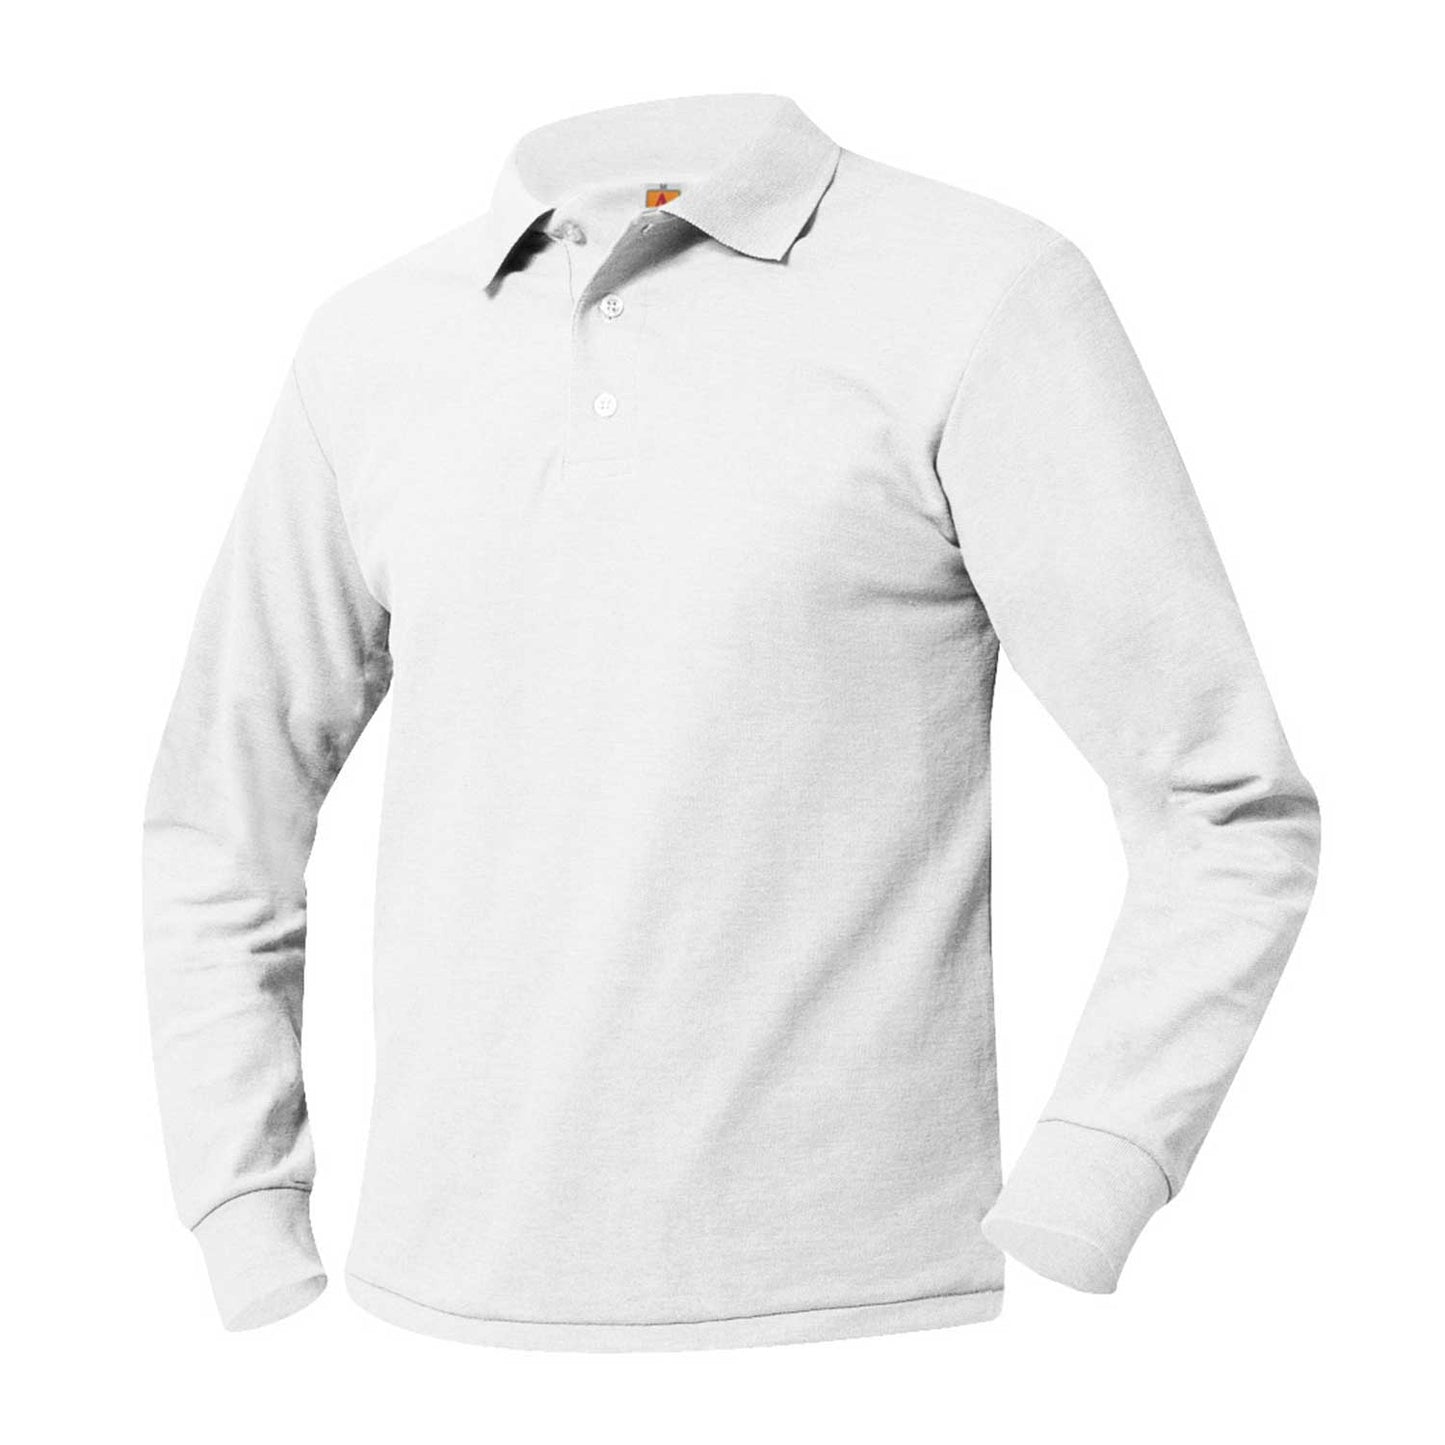 Men's/Unisex Pique Polo Shirt, Long Sleeves, Ribbed Cuffs - 1203